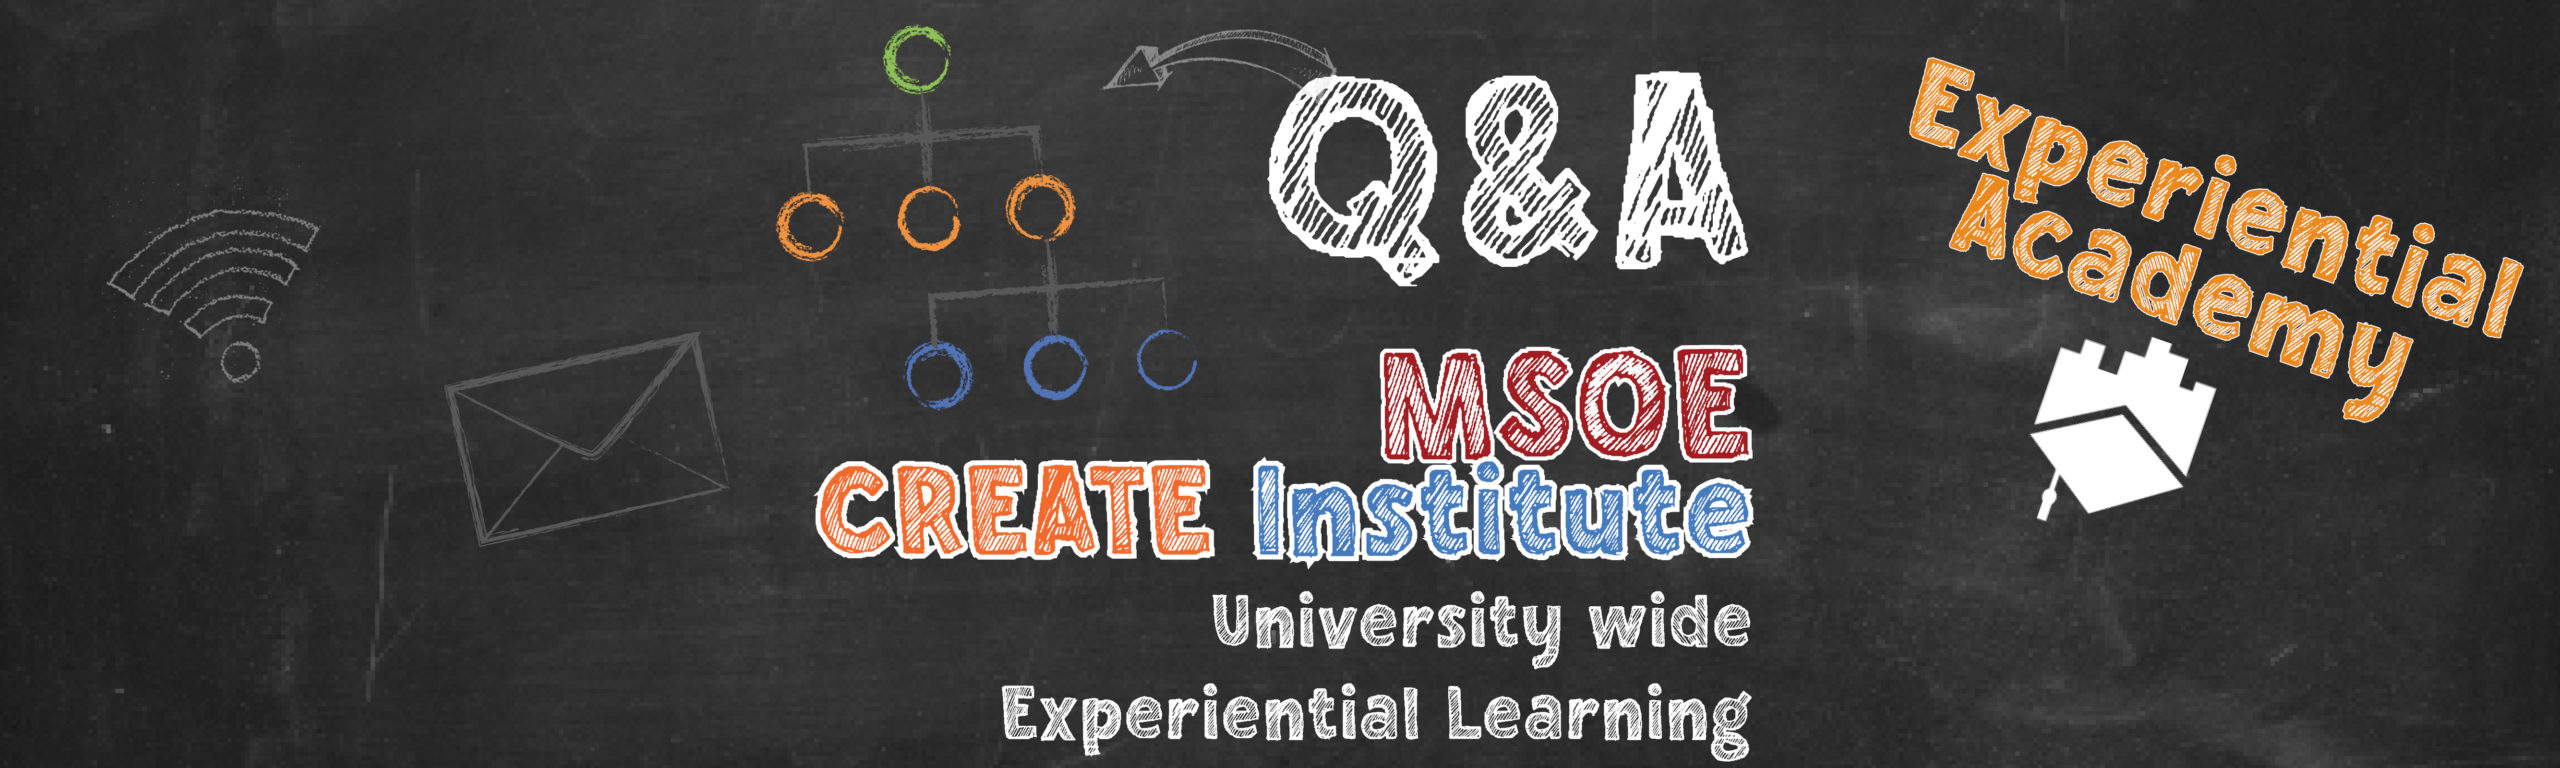 Q&A With MSOE CREATE Institute